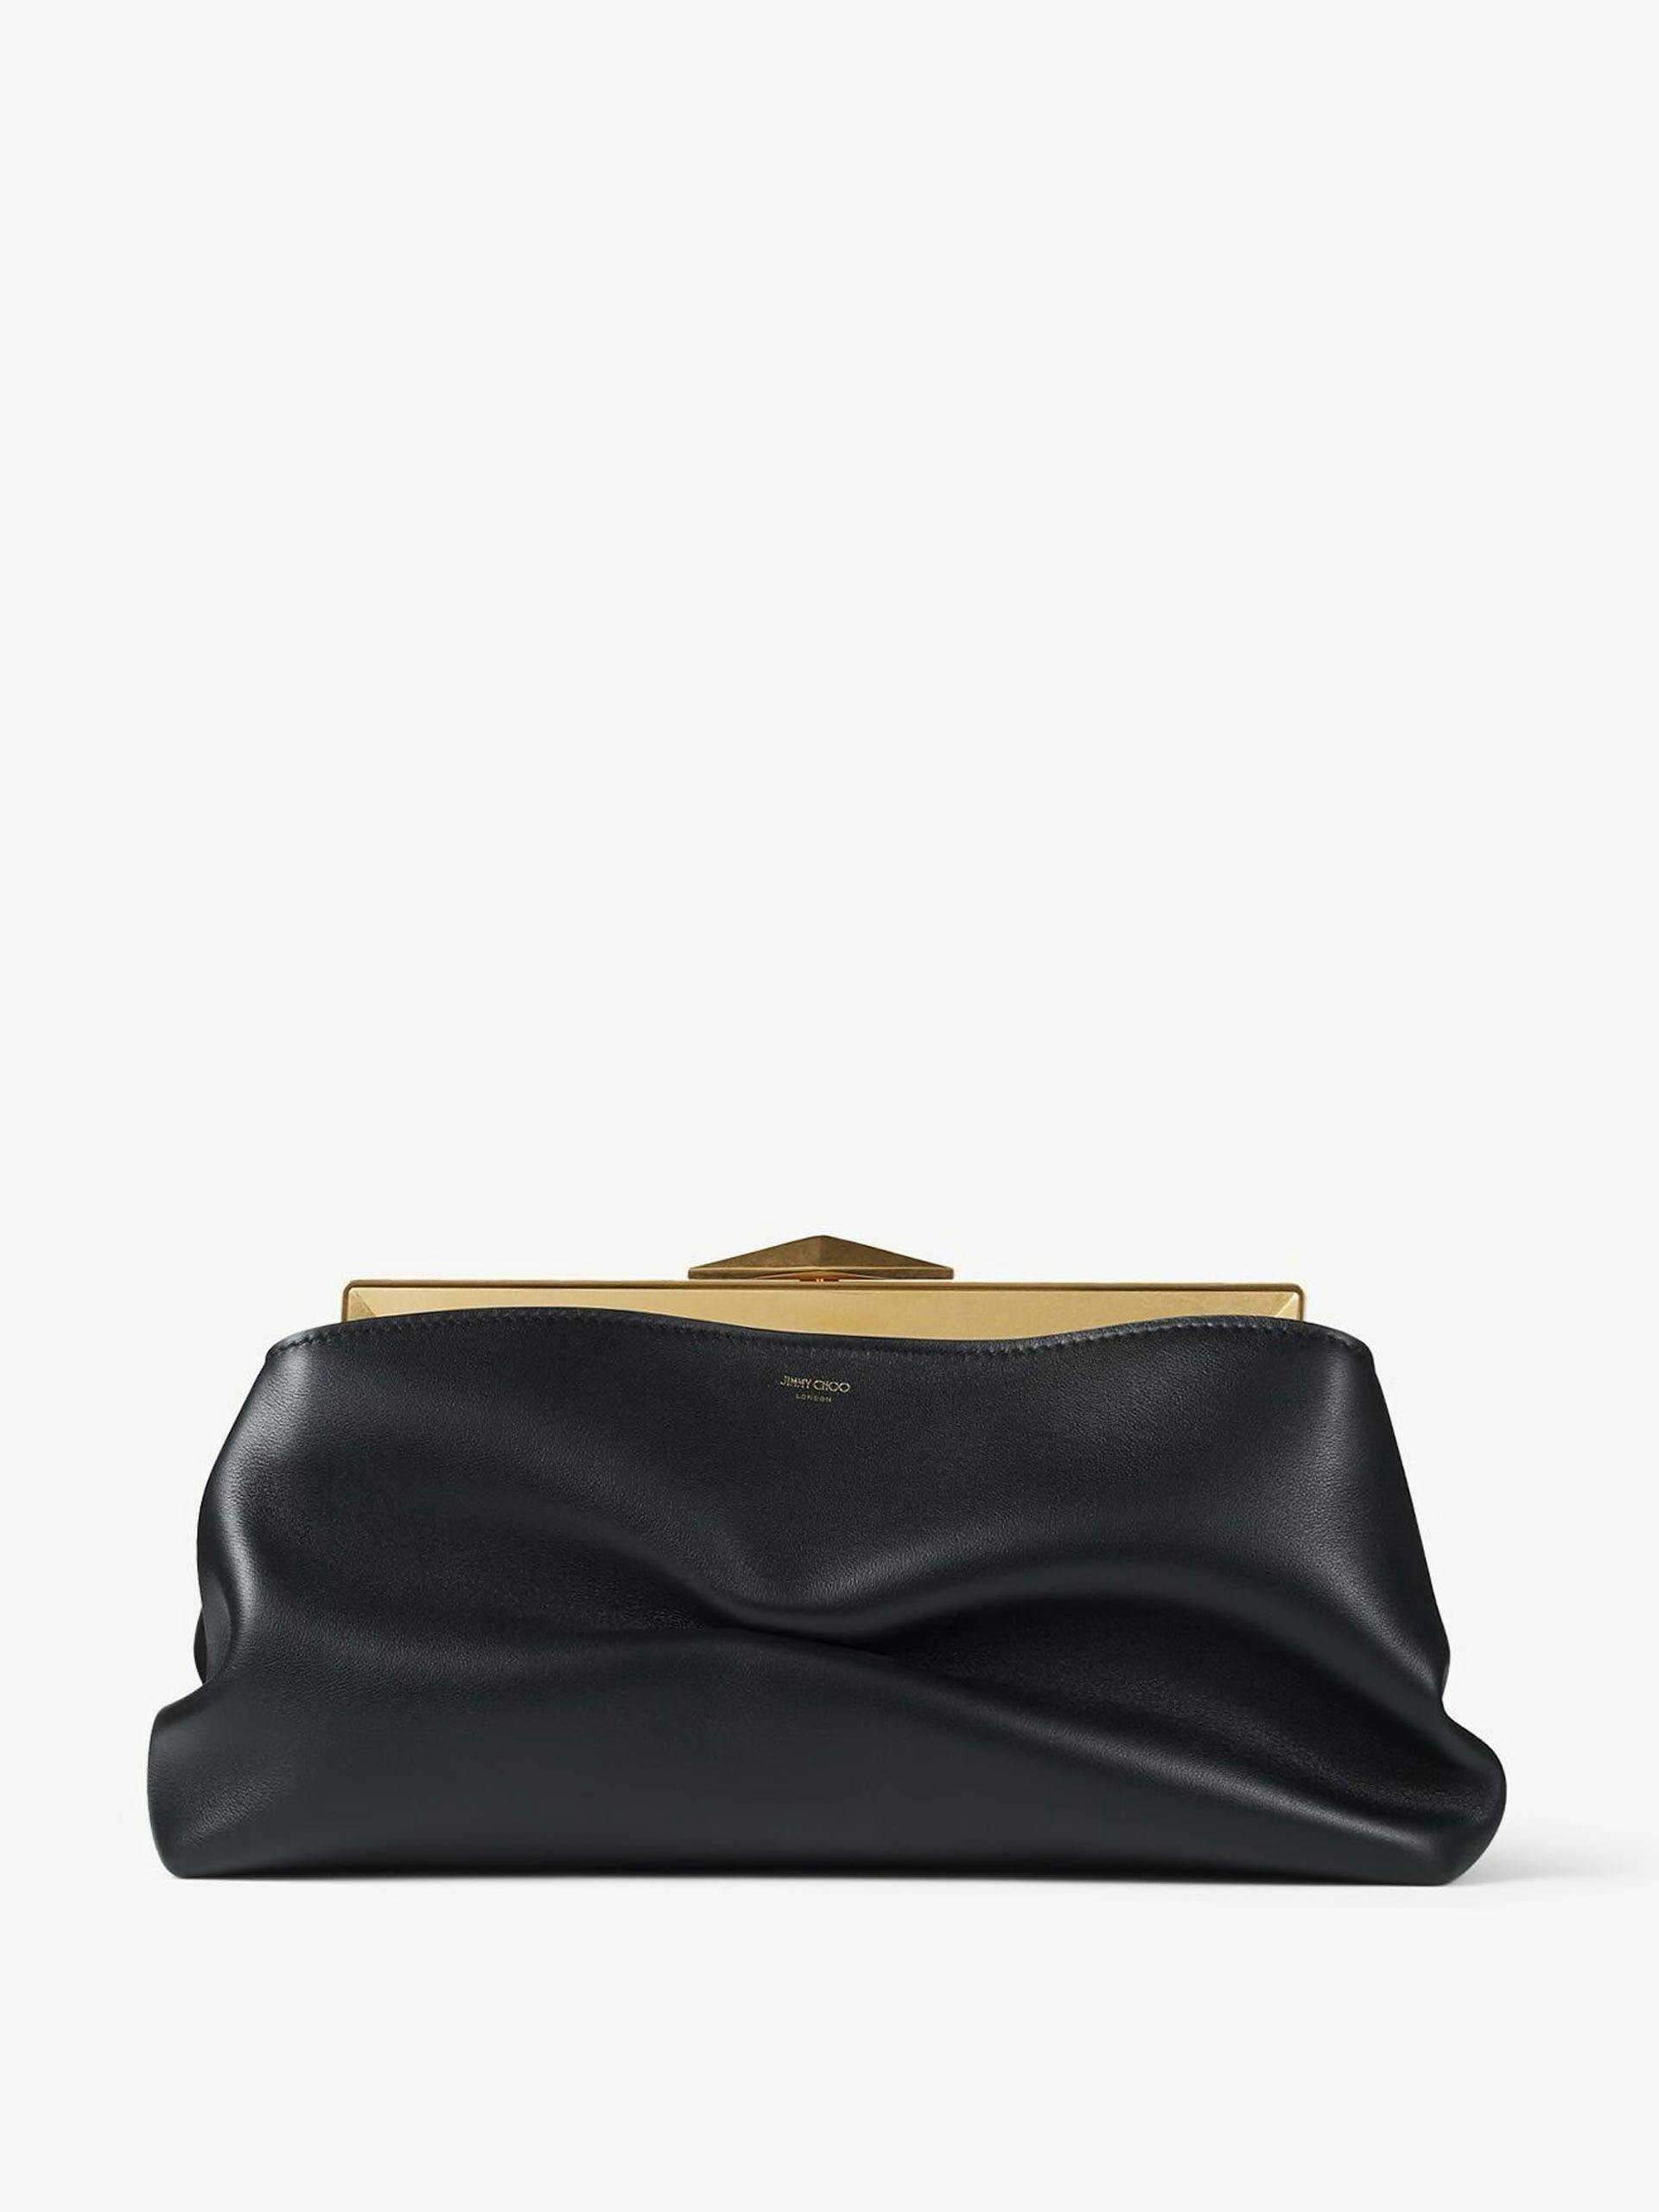 Black calf leather clutch bag with chain strap